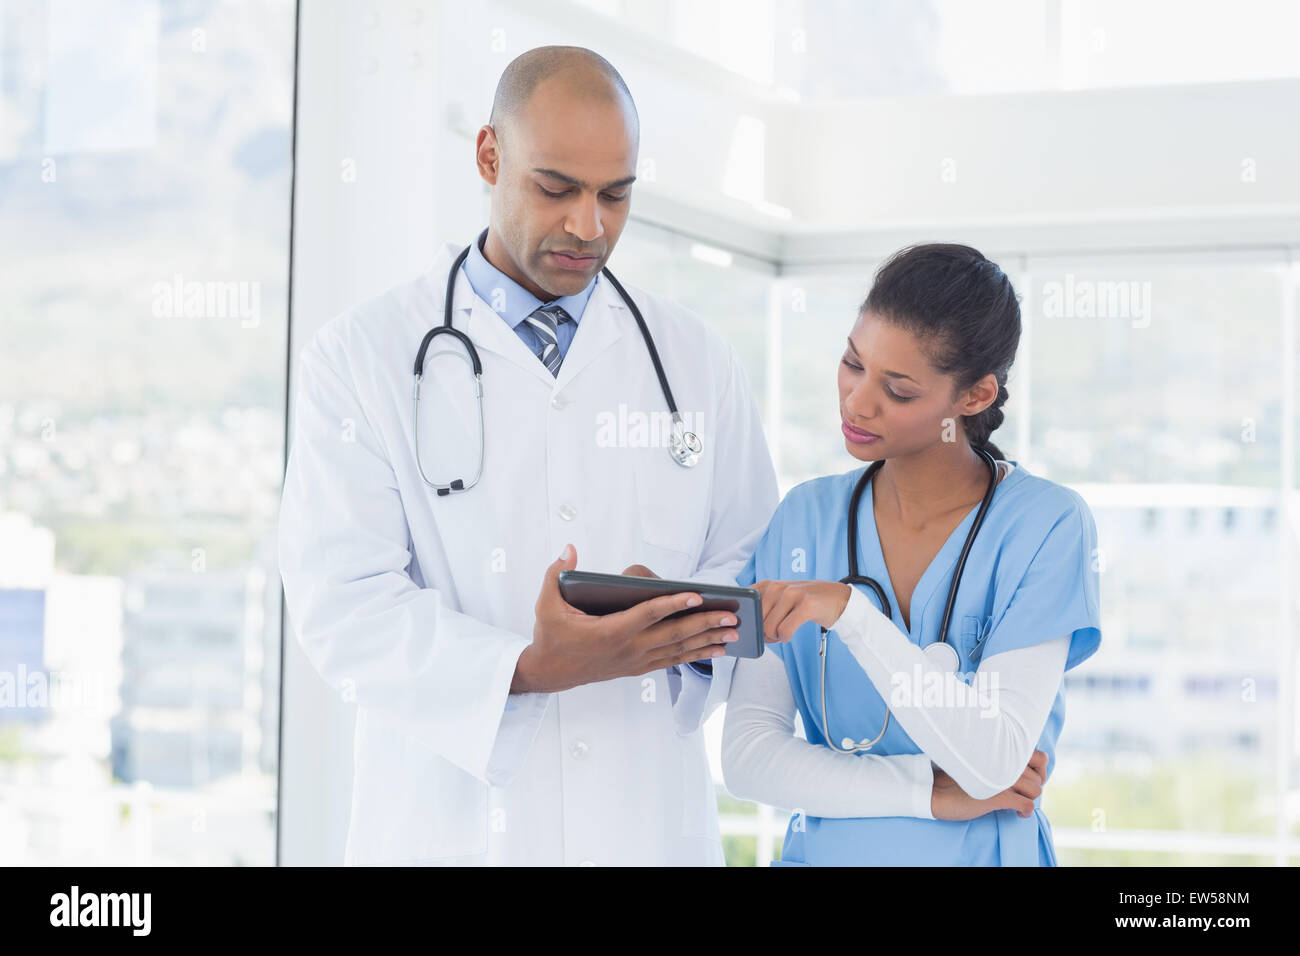 Smiling doctors working with tablet together Stock Photo